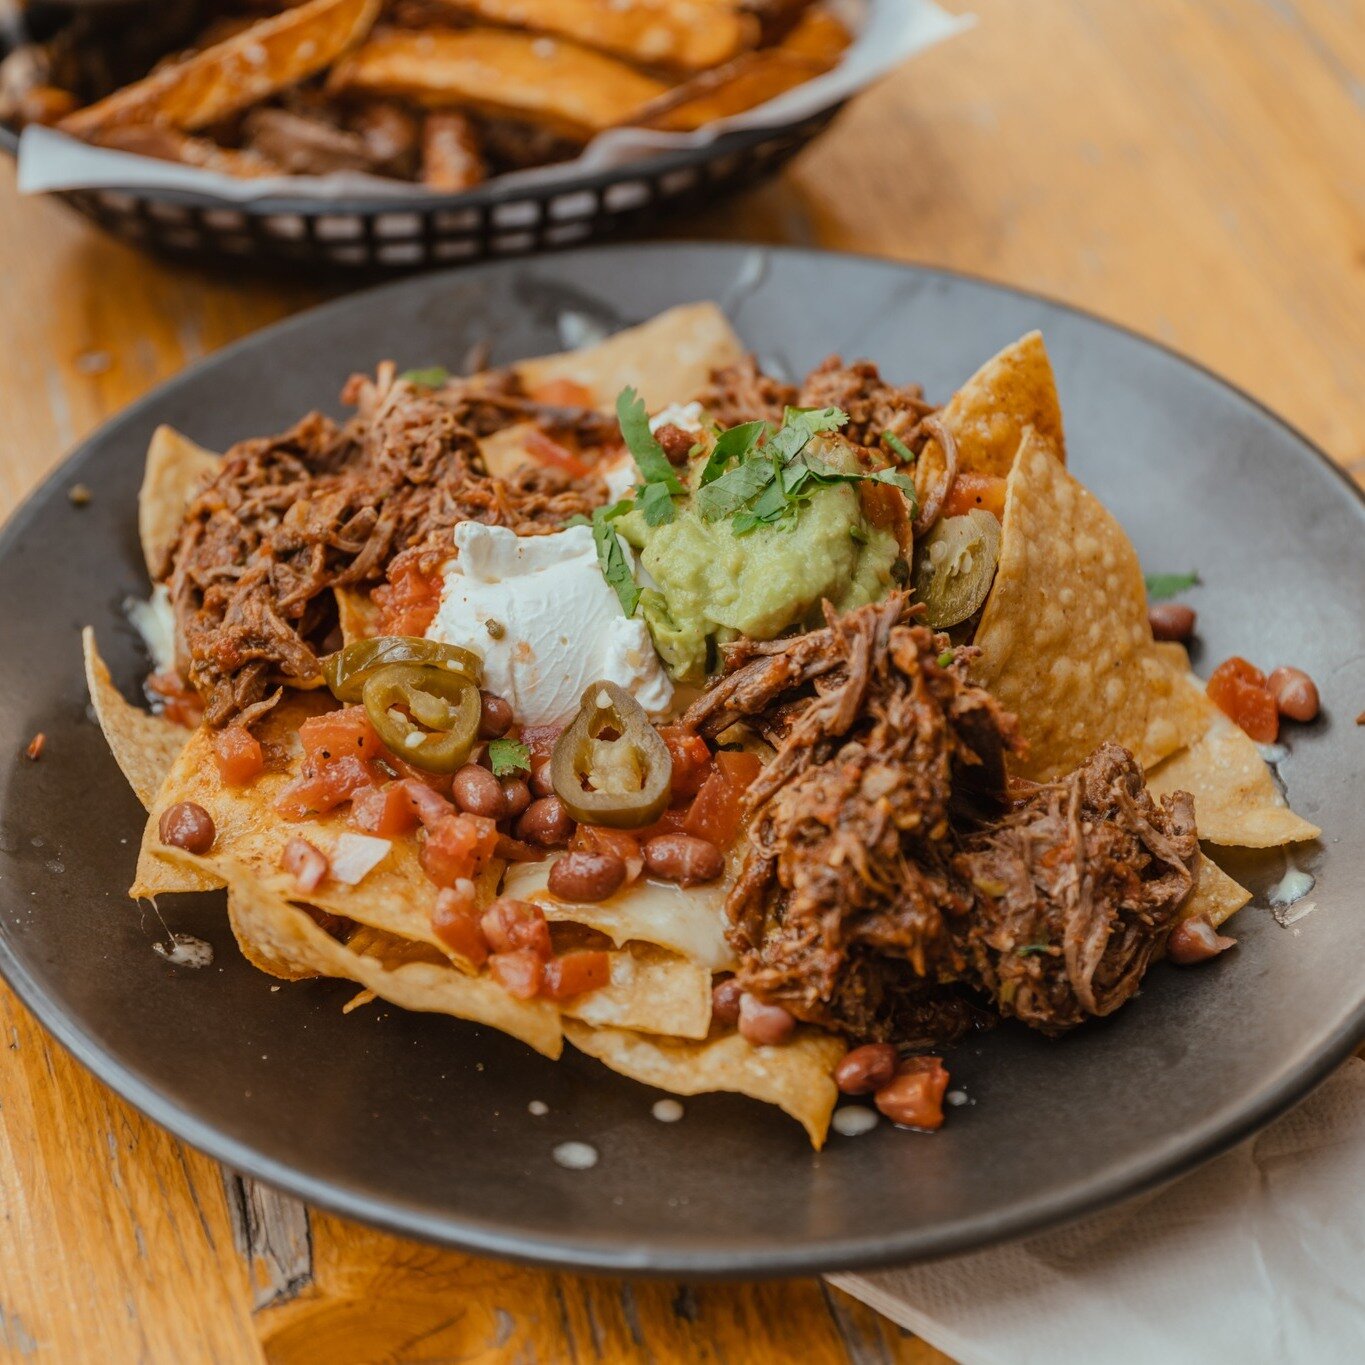 Bettys NACHOS are some of the best around If you need a big meal between mates after a day of shopping make sure to pop into Baha 😍

Just pop in when you feel like a feed, and for group bookings give us a call on 09 520 0002 or email info@bahabetty.